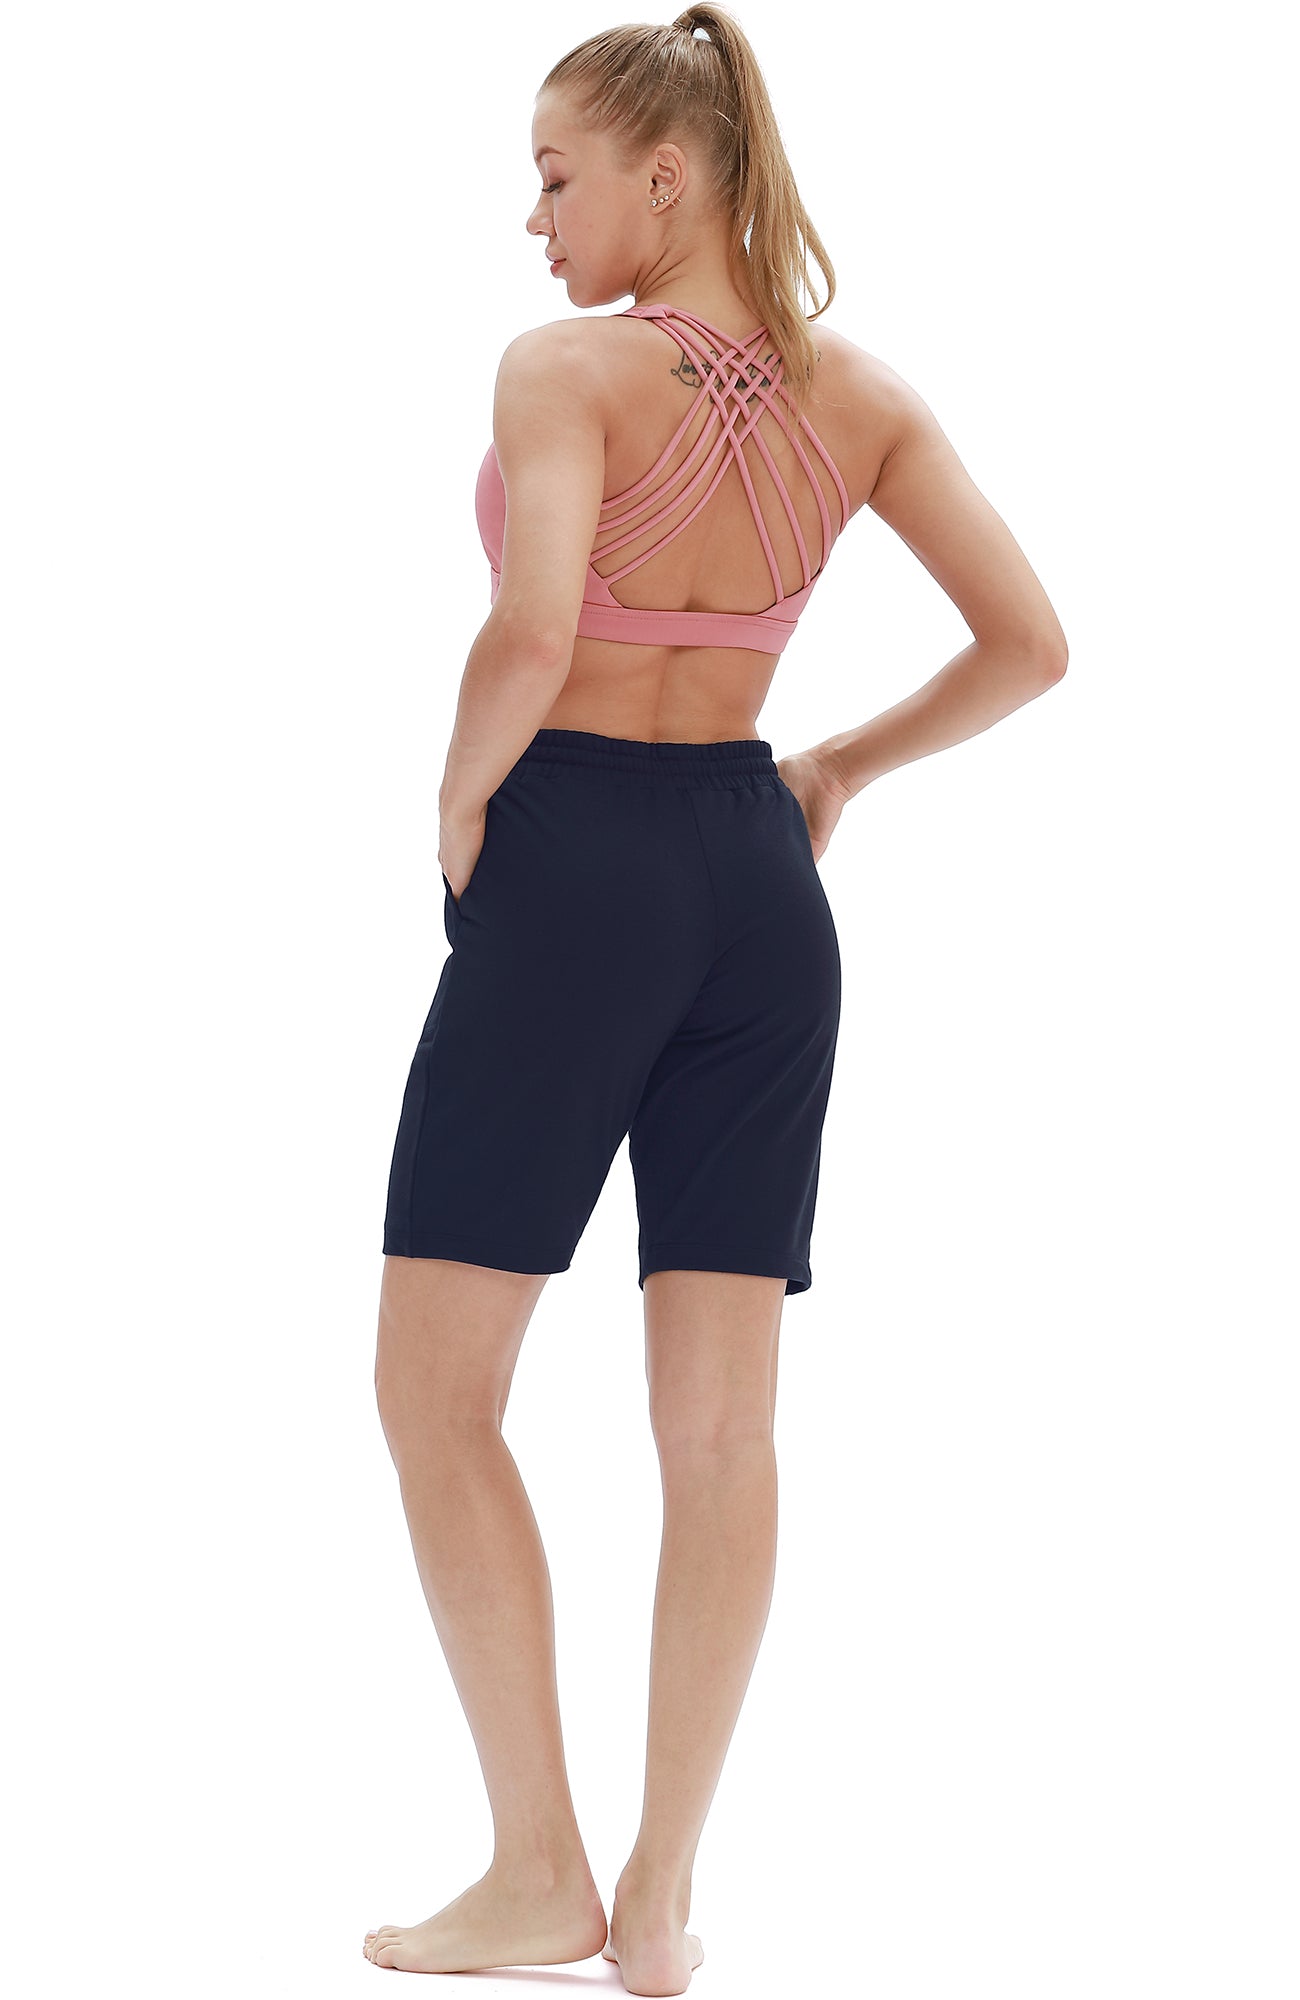 SP15 icyzone Athletic Running Yoga Shorts for Women - Women's